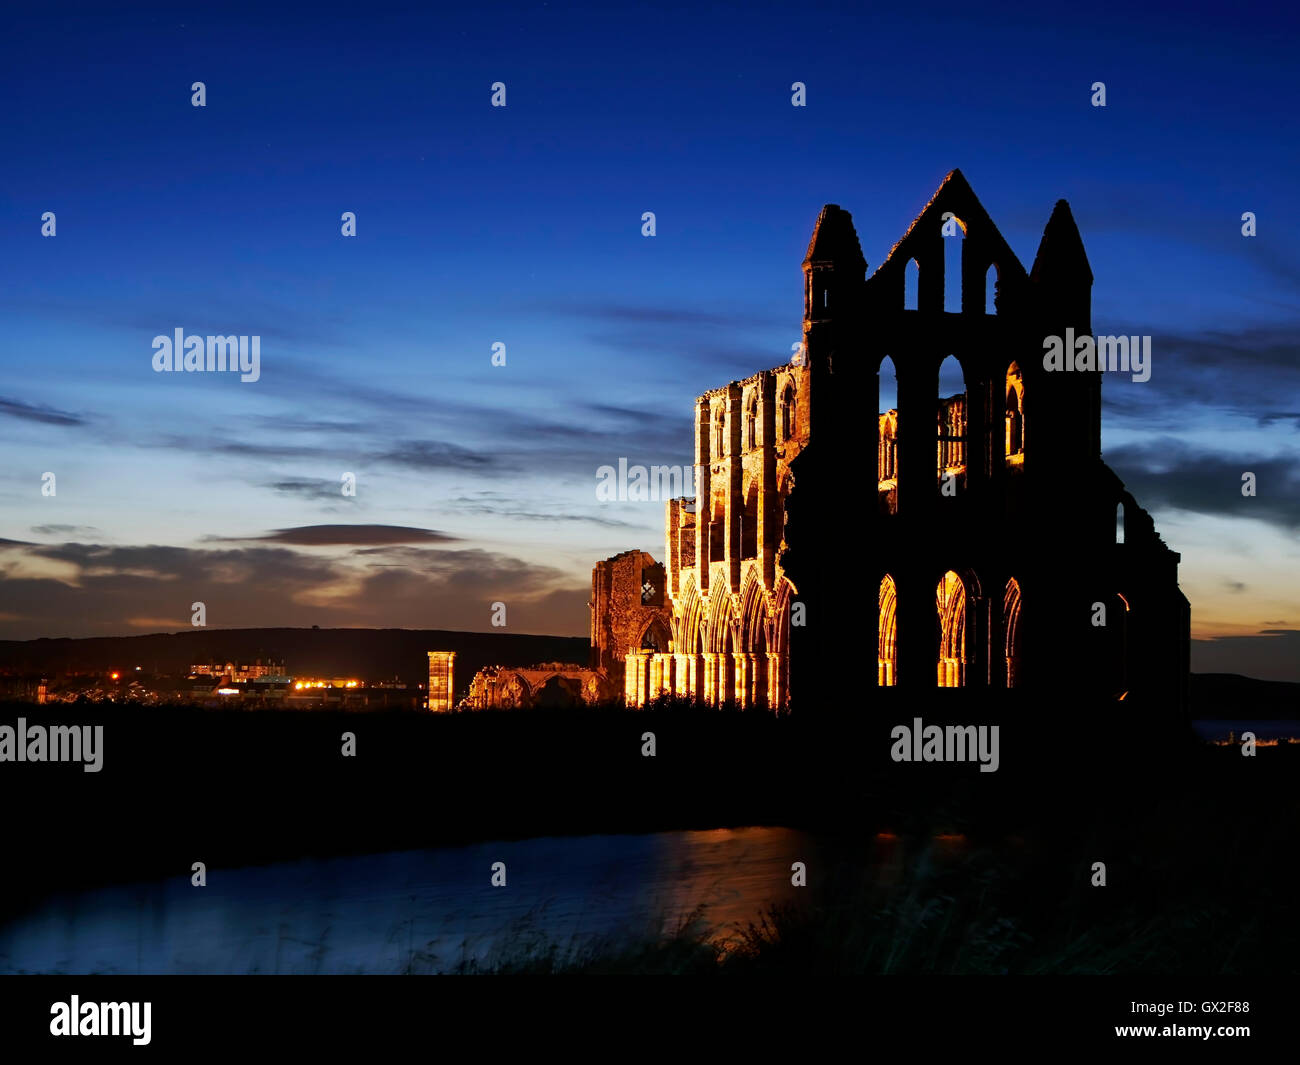 Whitby Abbey at night Esk Valley North Yorkshire Moors England United Kingdom UK Great Britain GB Steam & heritage diesel trains Stock Photo